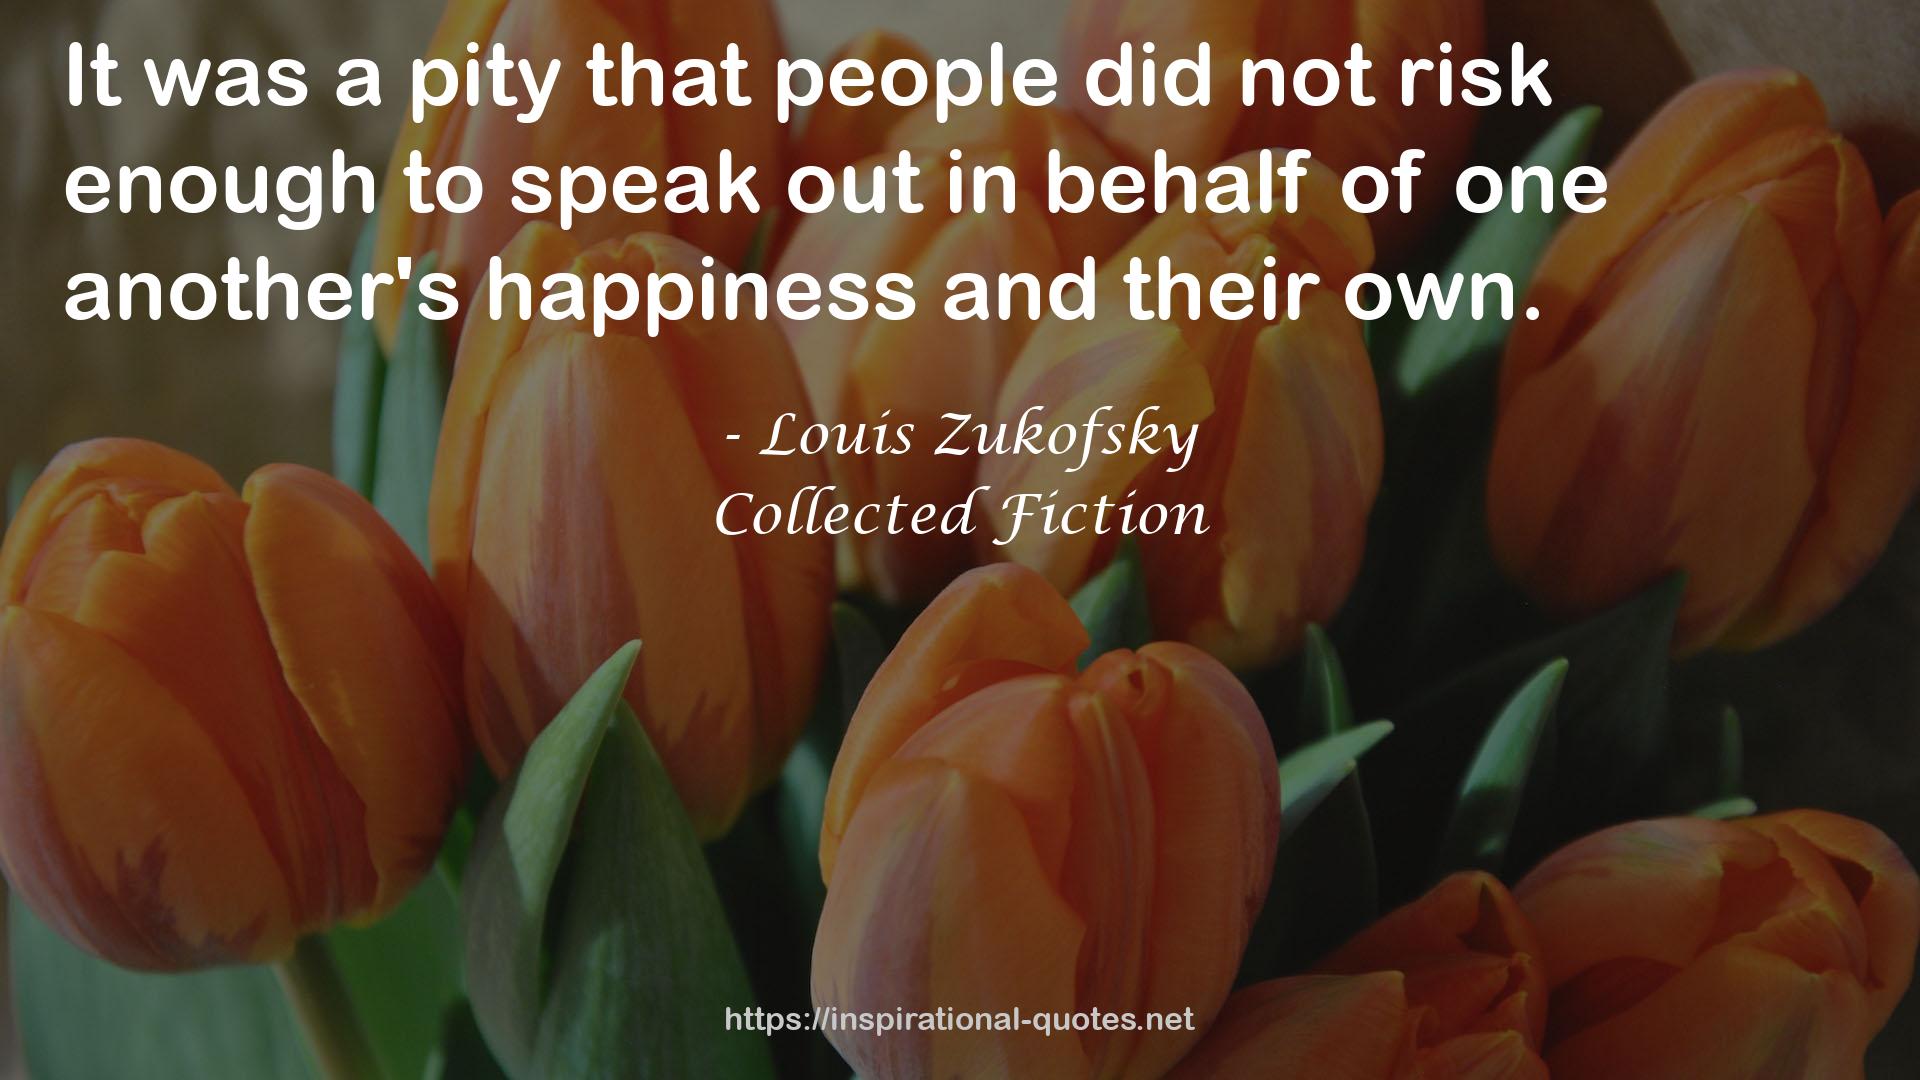 Louis Zukofsky QUOTES